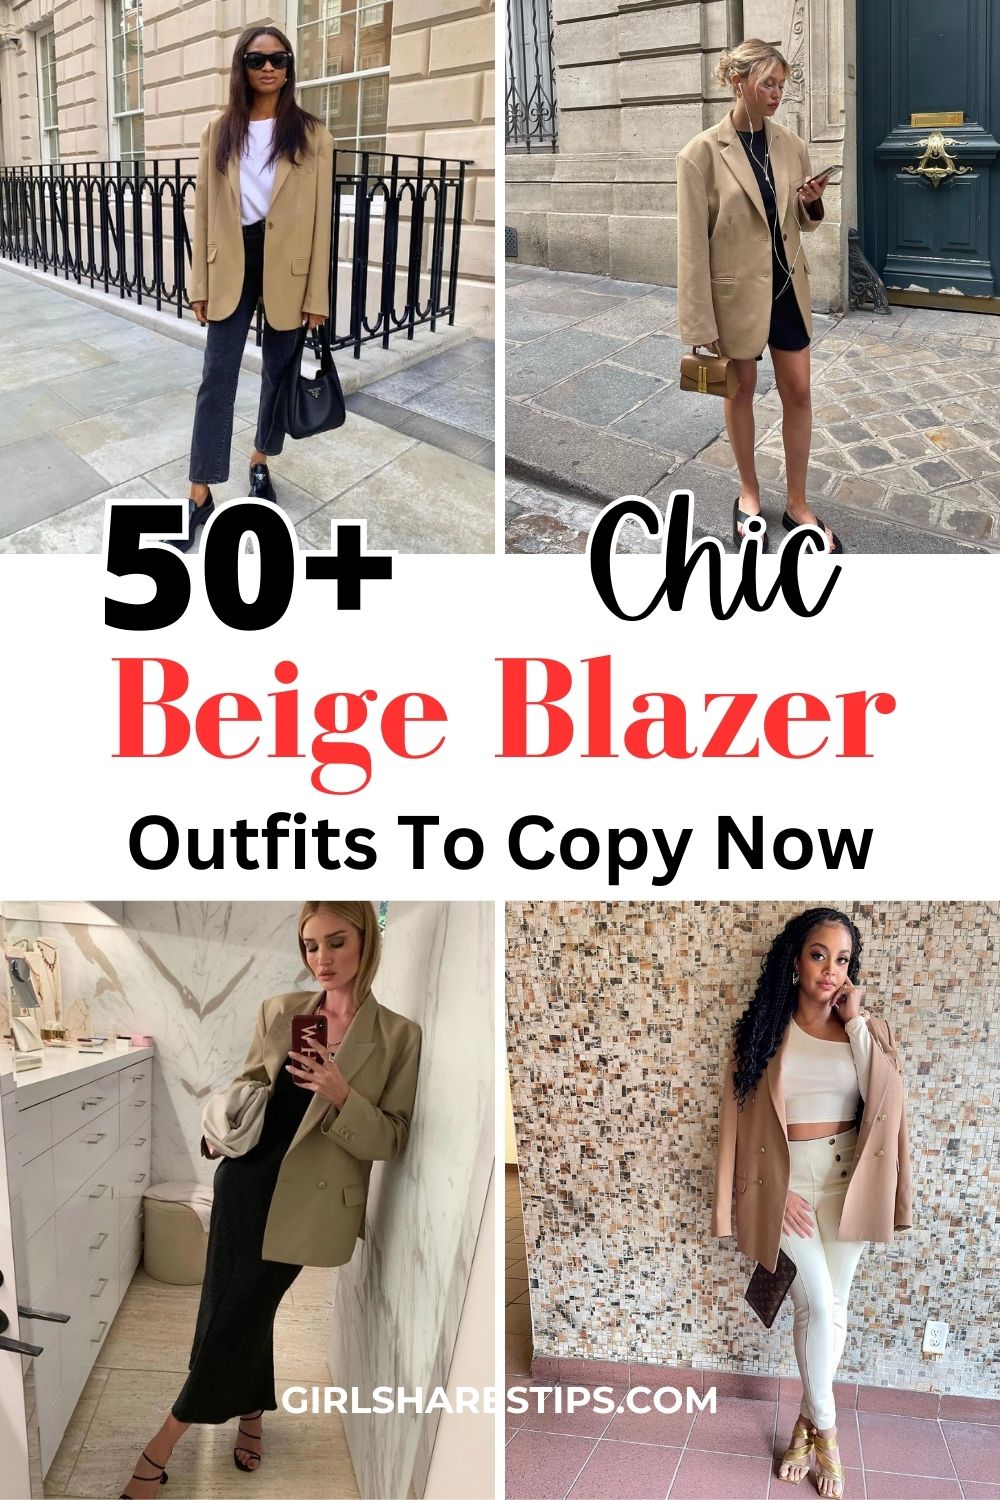 beige blazer outfit ideas for women collage